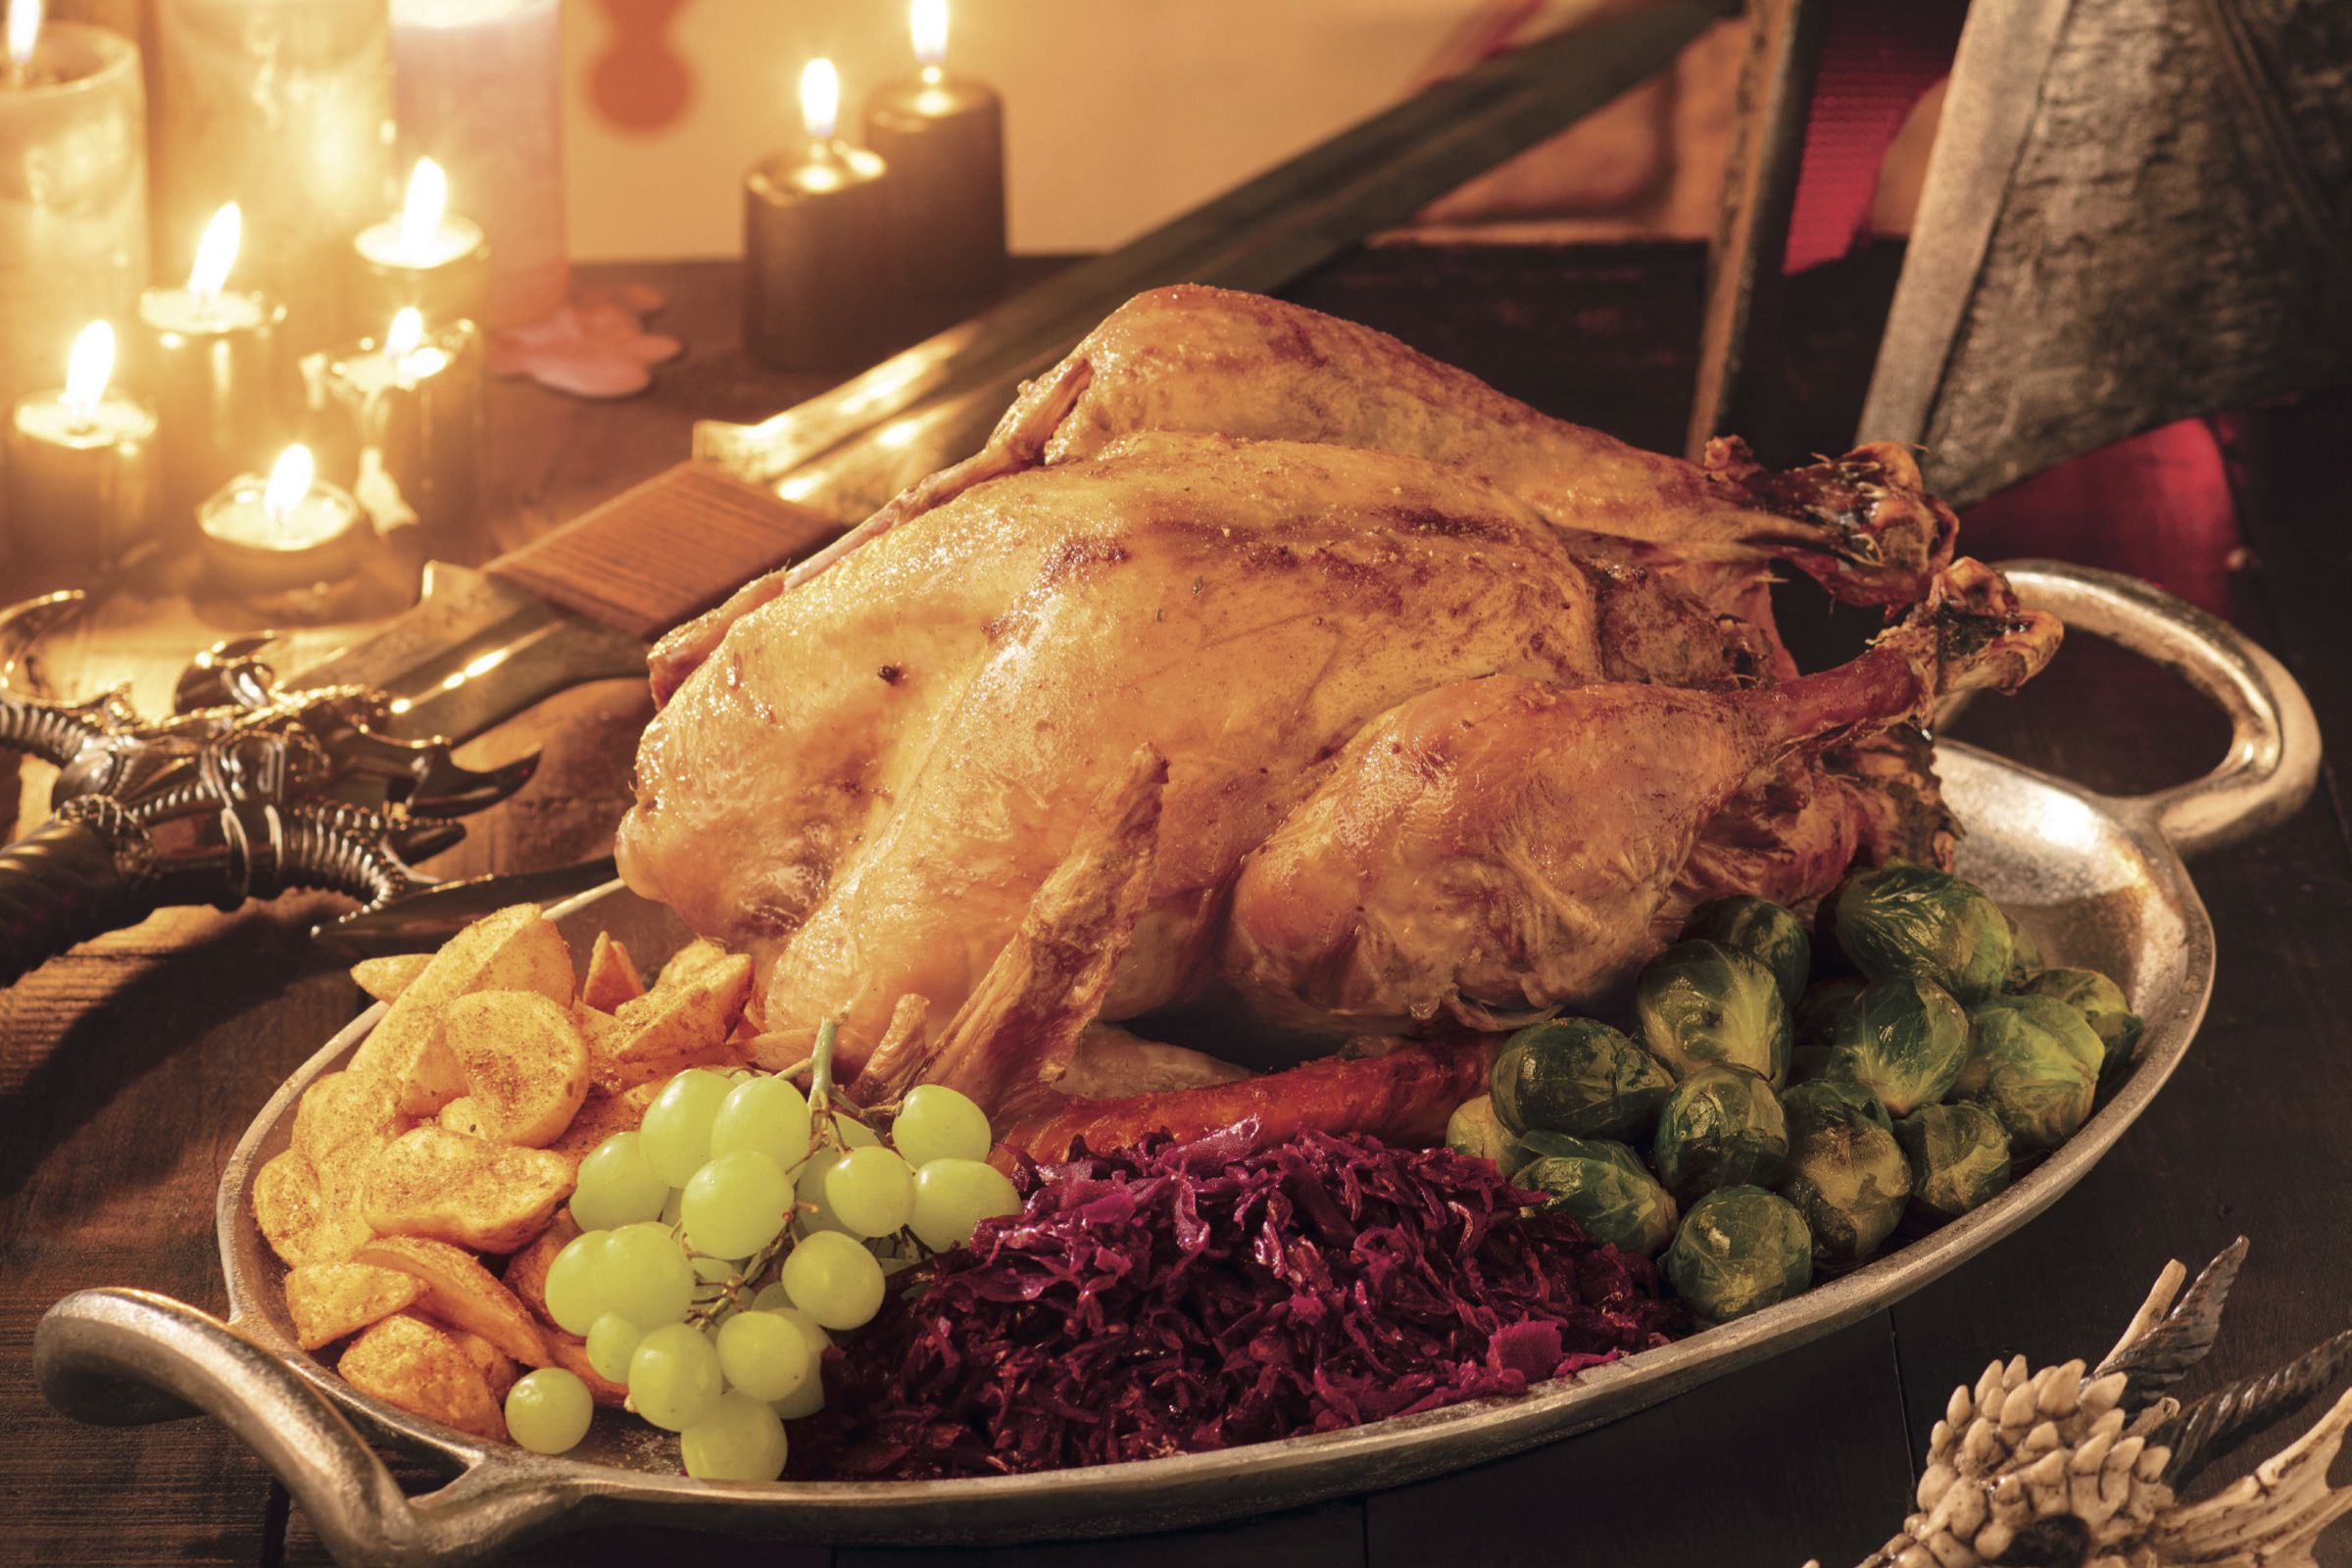 A roast turkey dinner in front of a helmet, sword, and banner representing Dragon Age’s templar order.